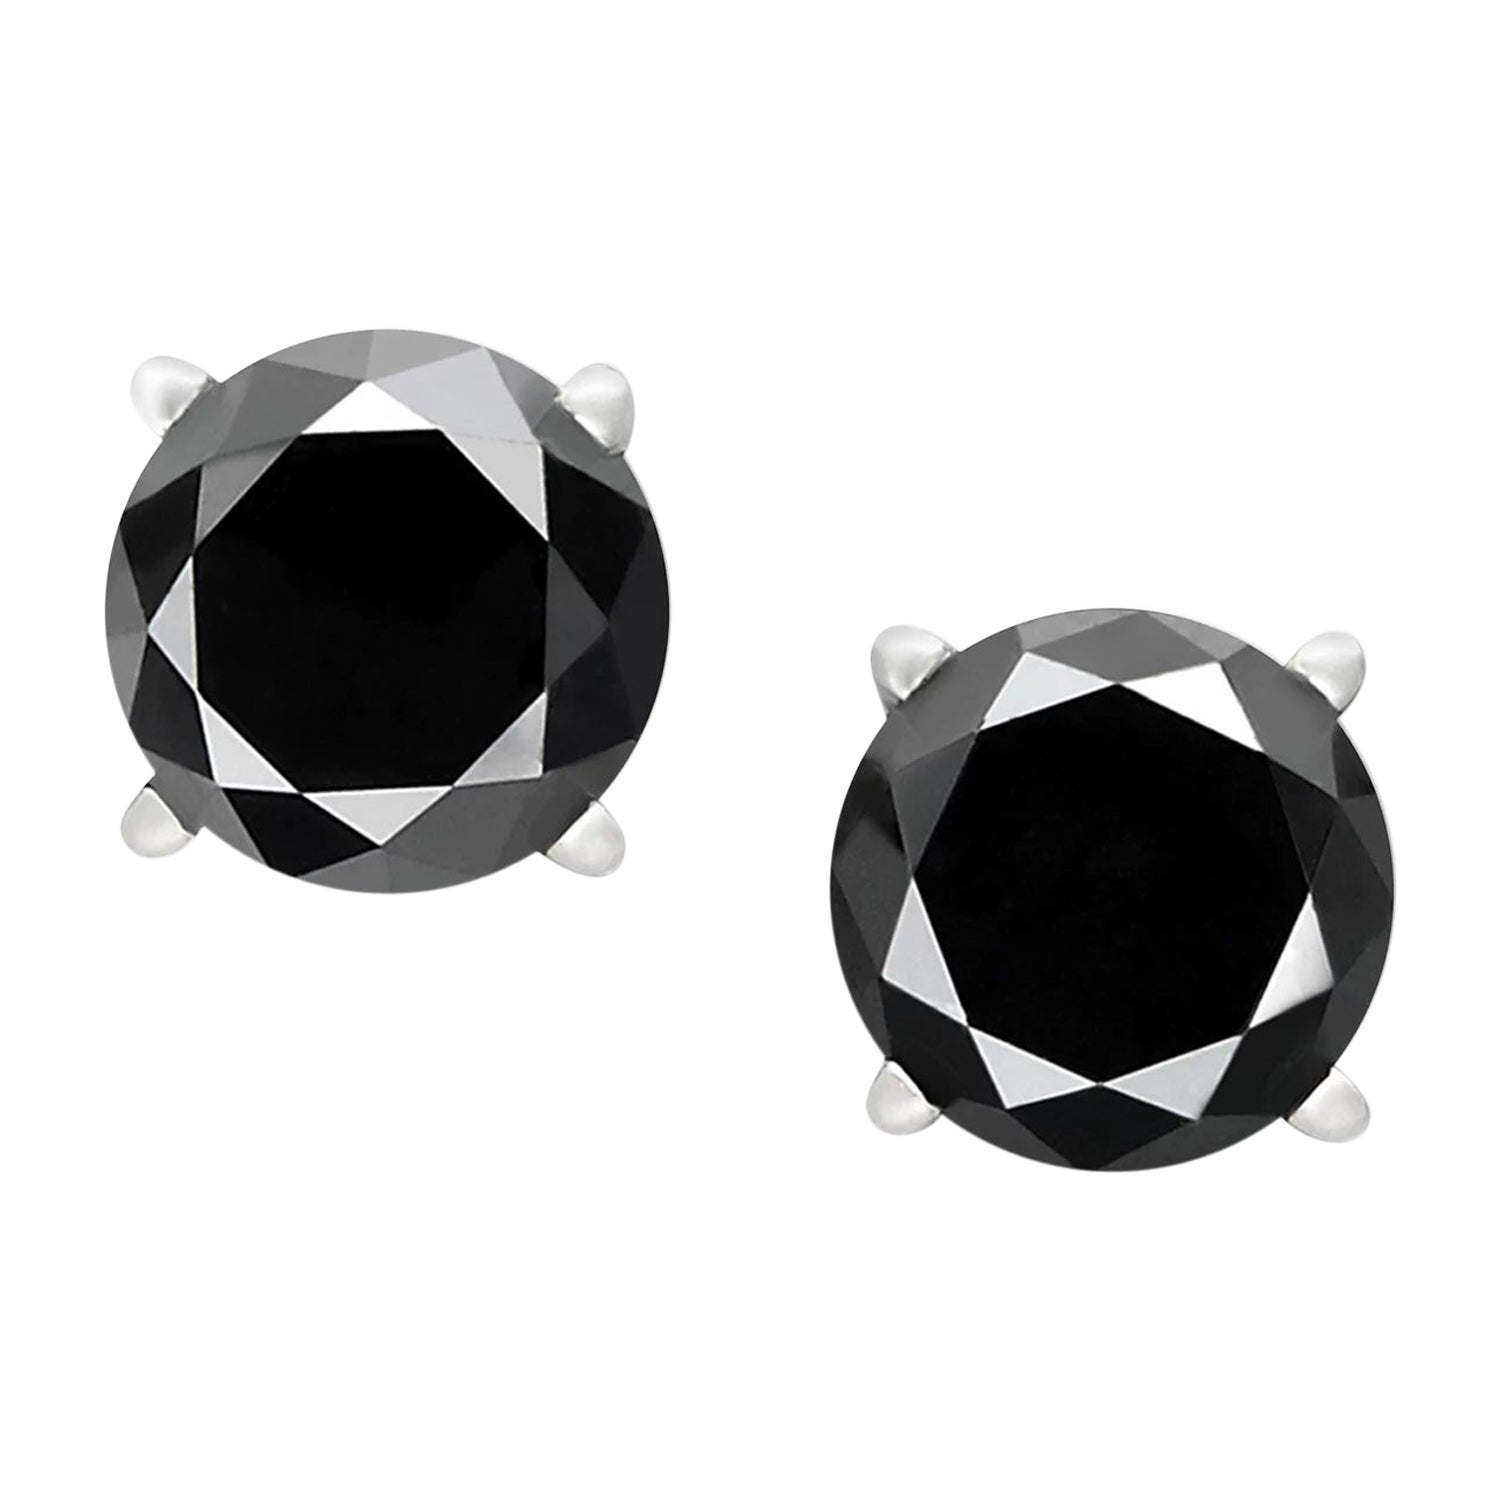 0.88 Carat Total Round Black Diamond Solitaire Stud Earrings in 14 K White Gold